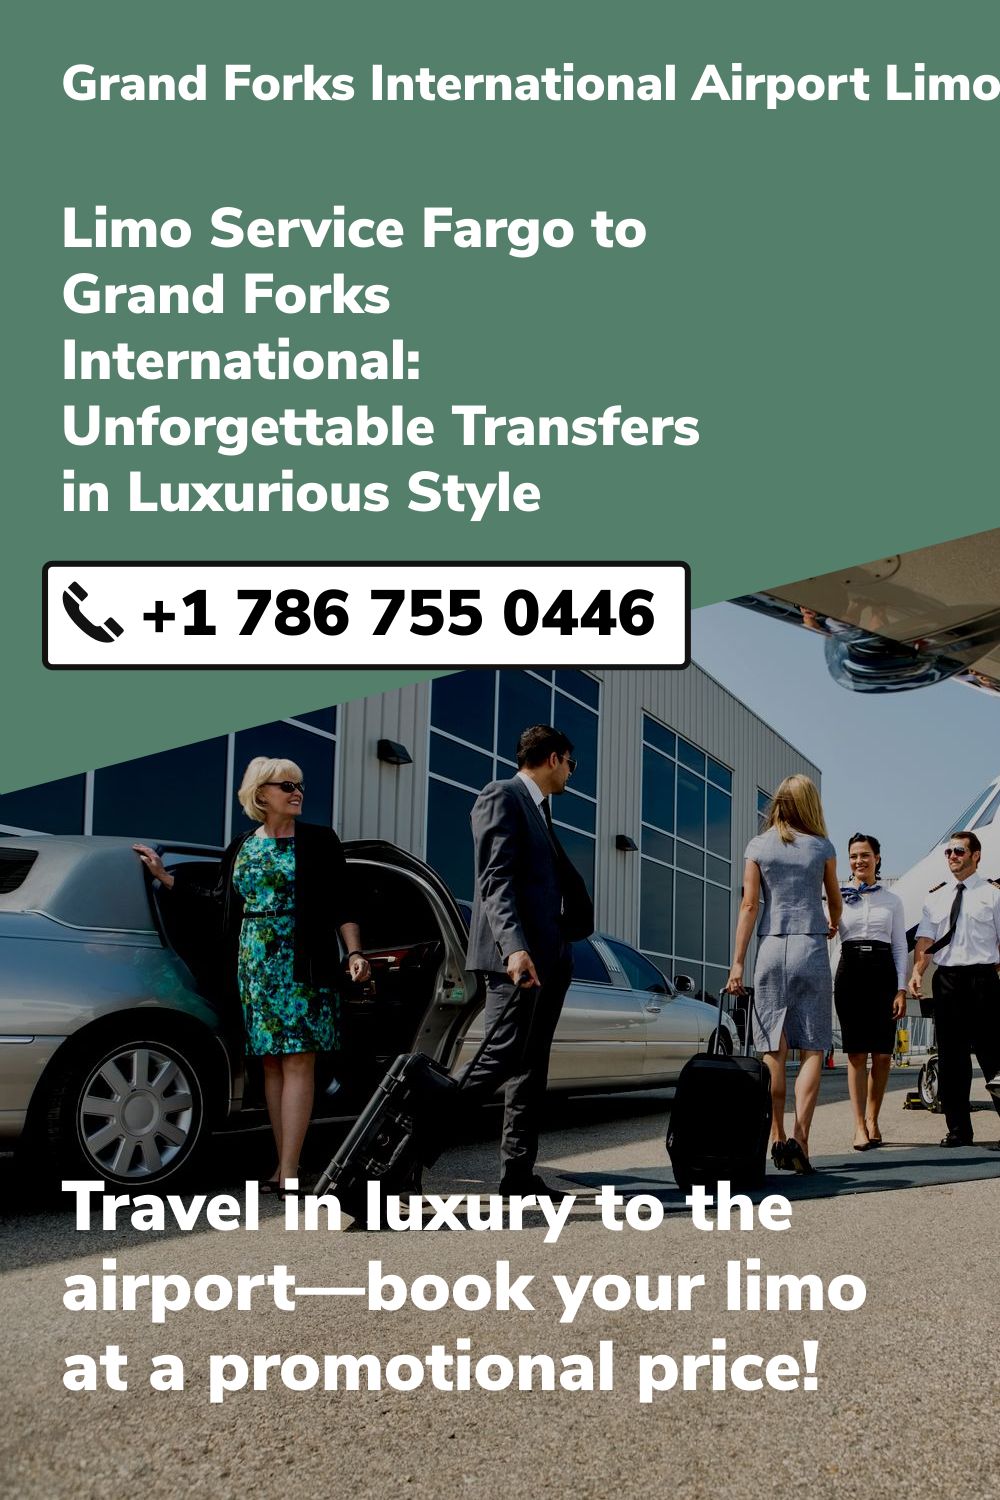 Grand Forks International Airport Limo